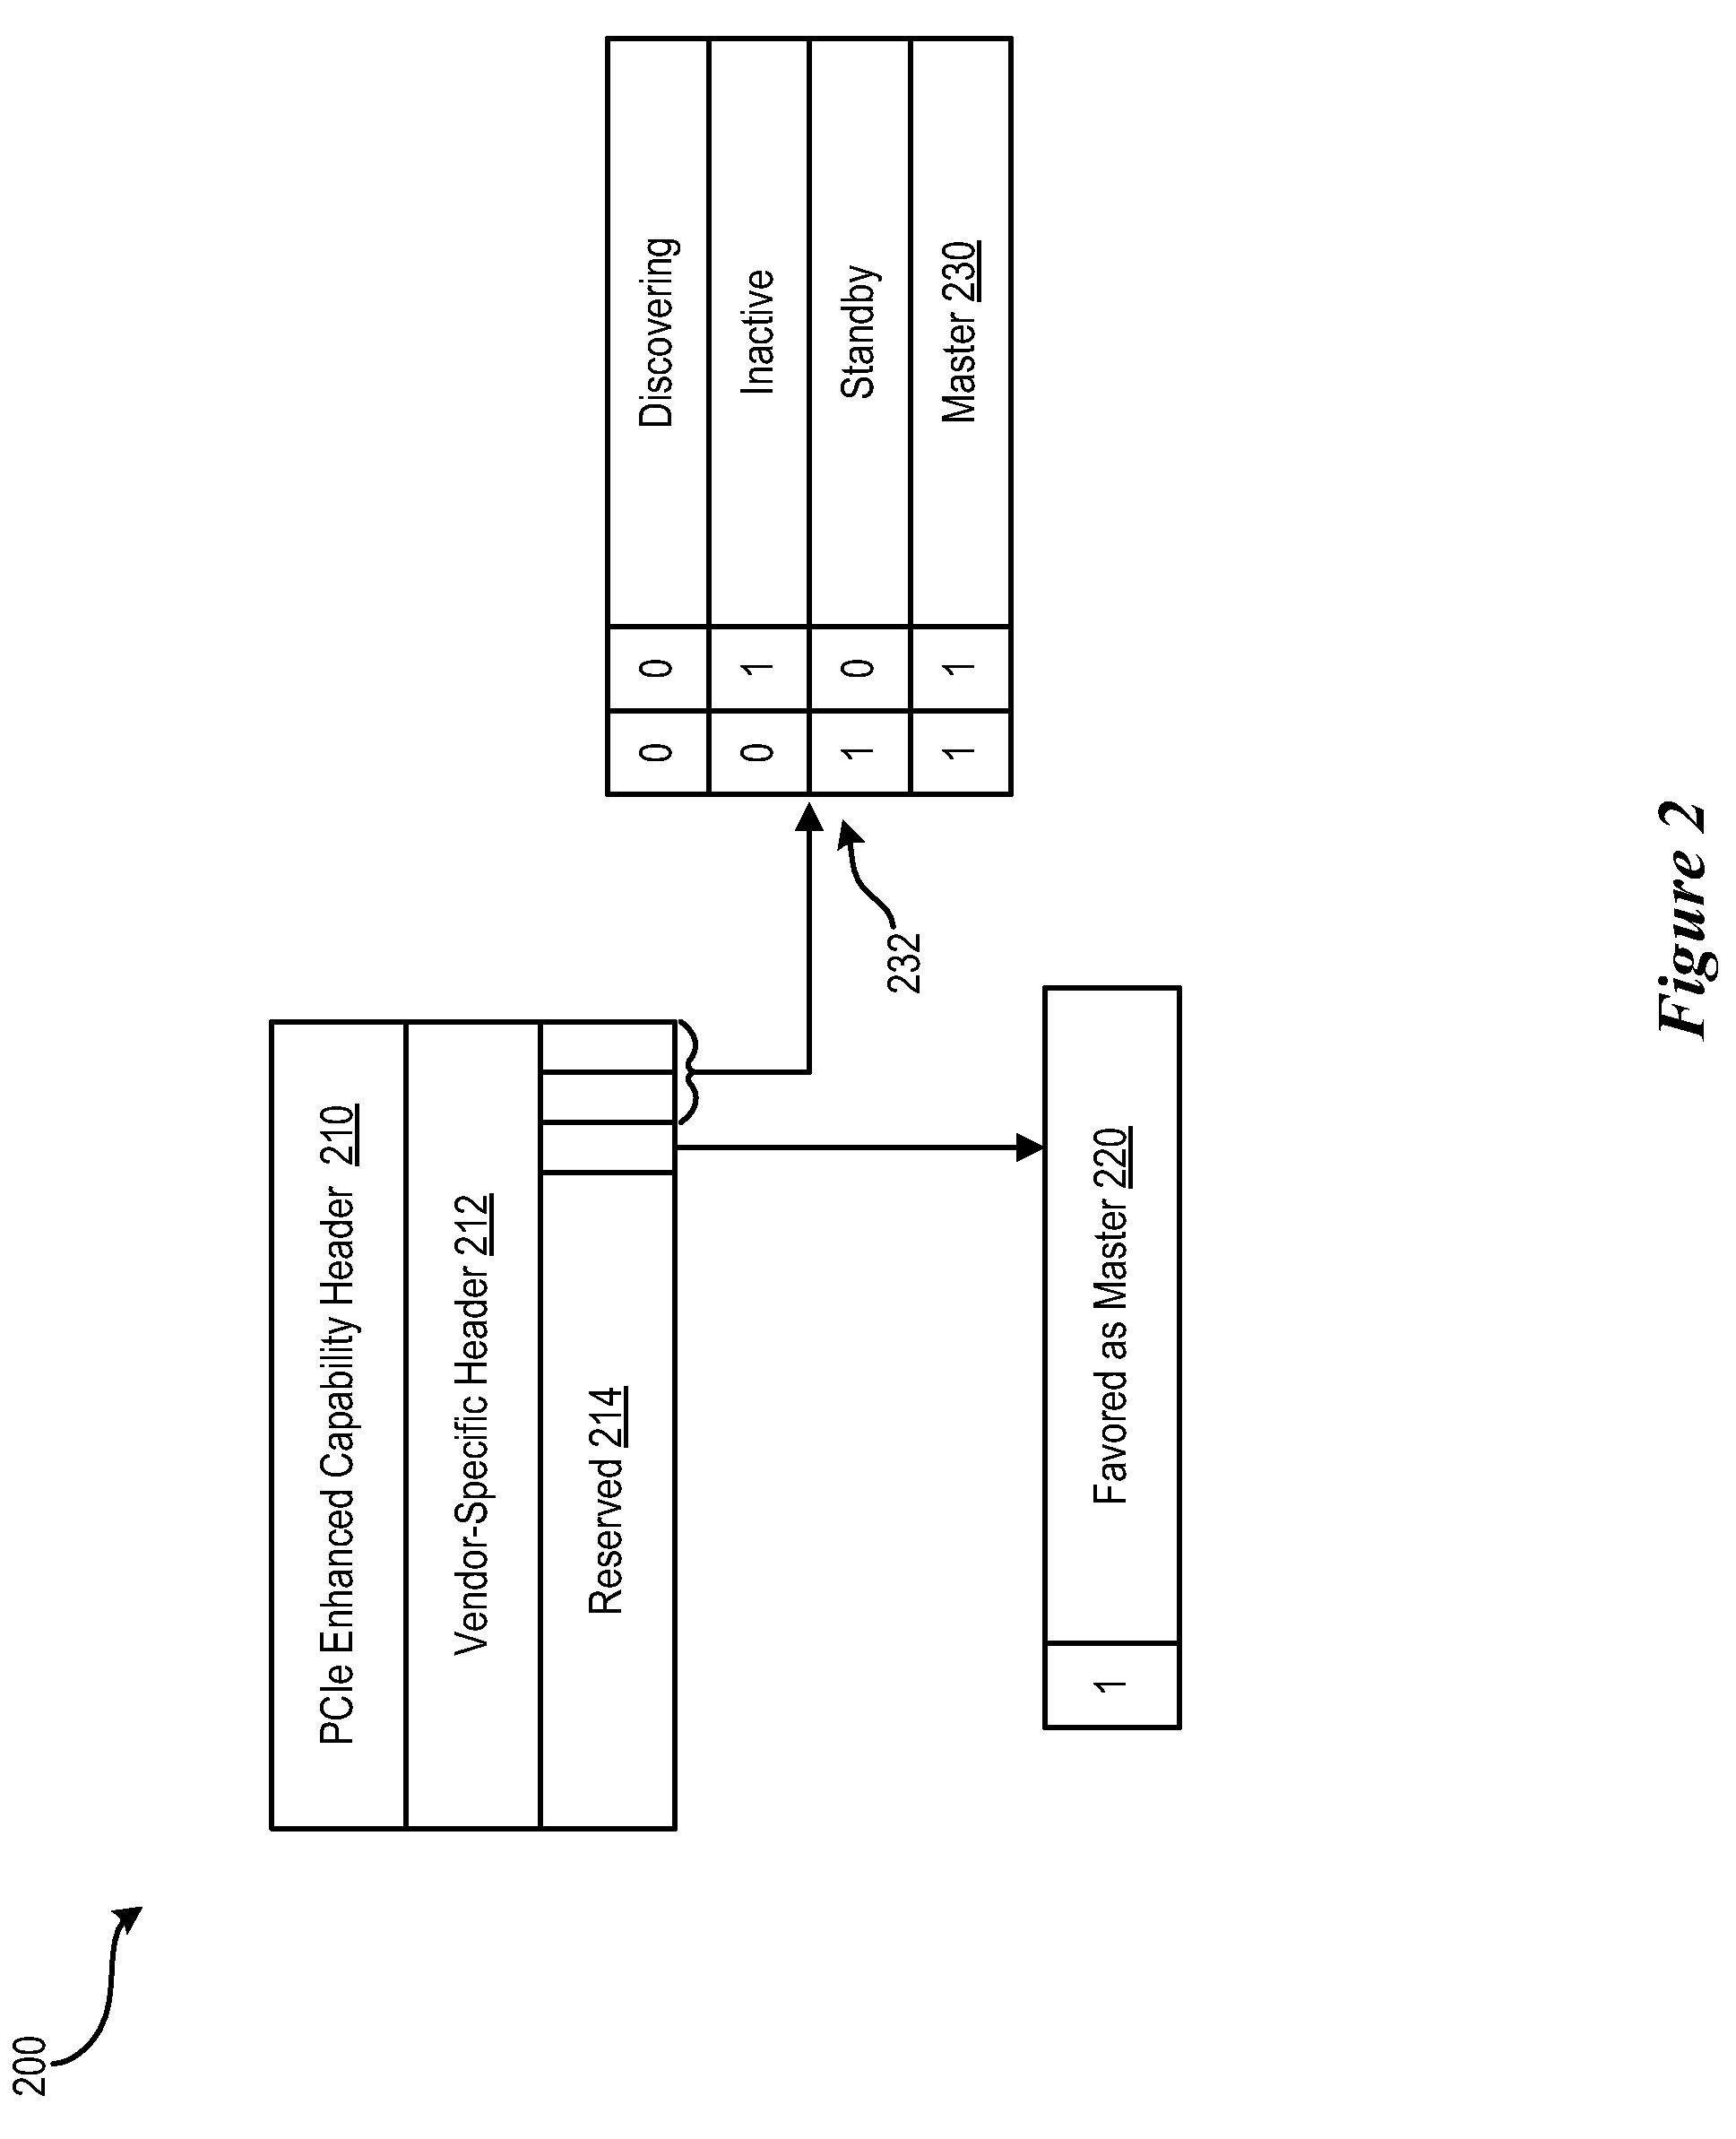 System and method for allowing coexistence of multiple PCI managers in a PCI express system